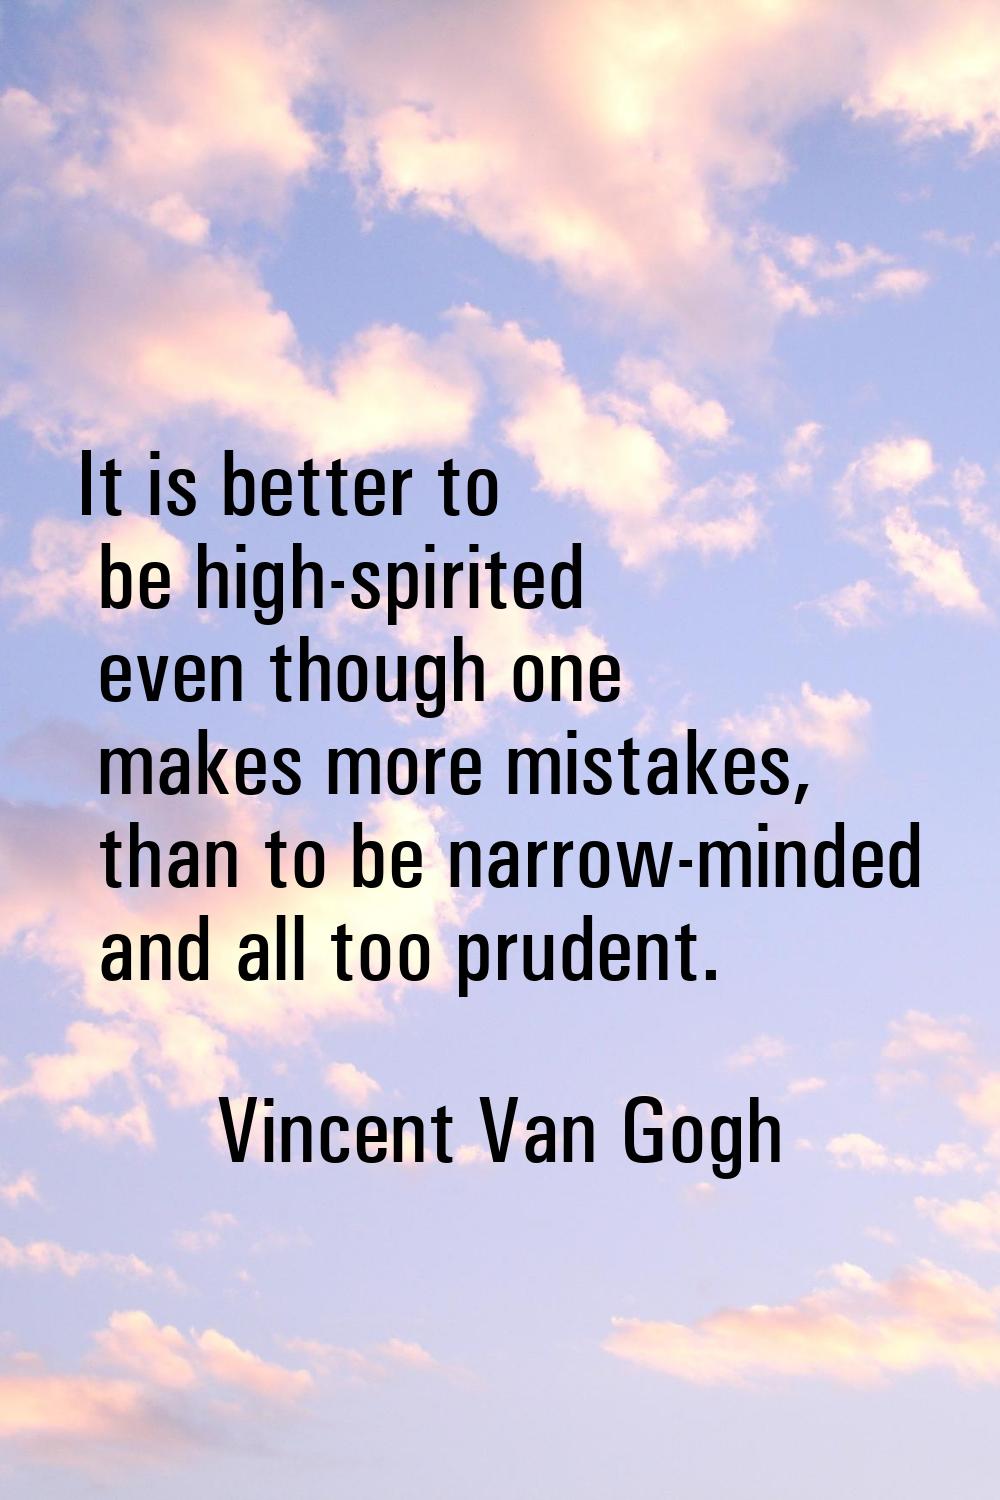 It is better to be high-spirited even though one makes more mistakes, than to be narrow-minded and 